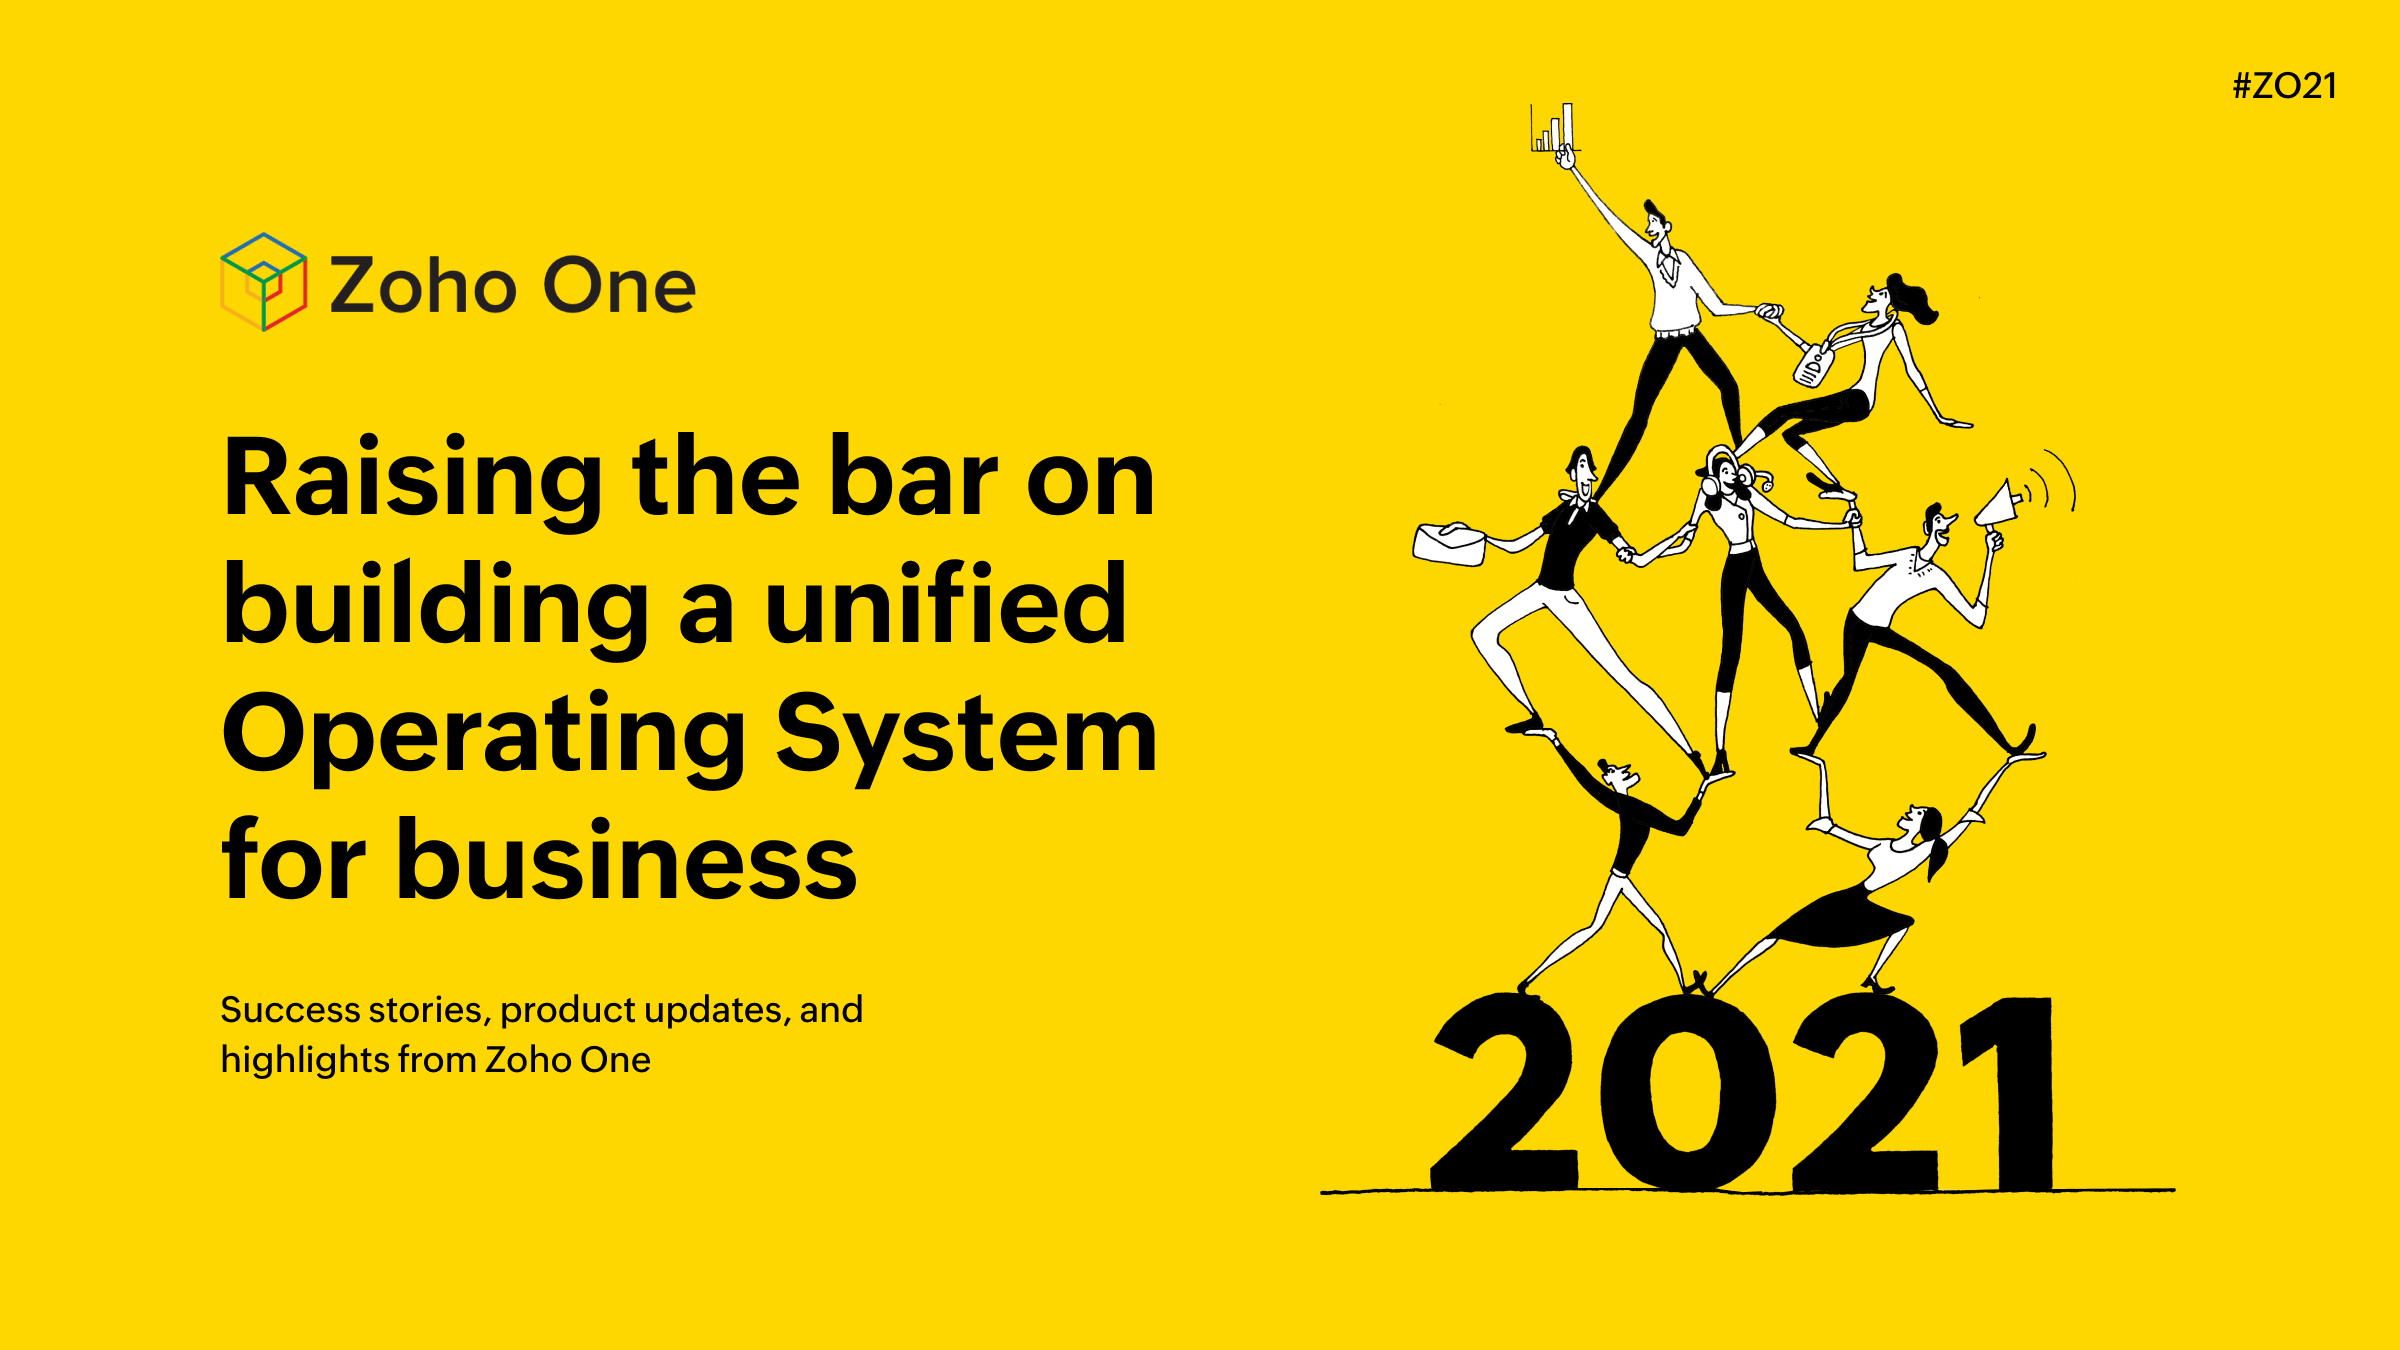 Zoho One in 2021: Raising the bar on building a unified operating system for business